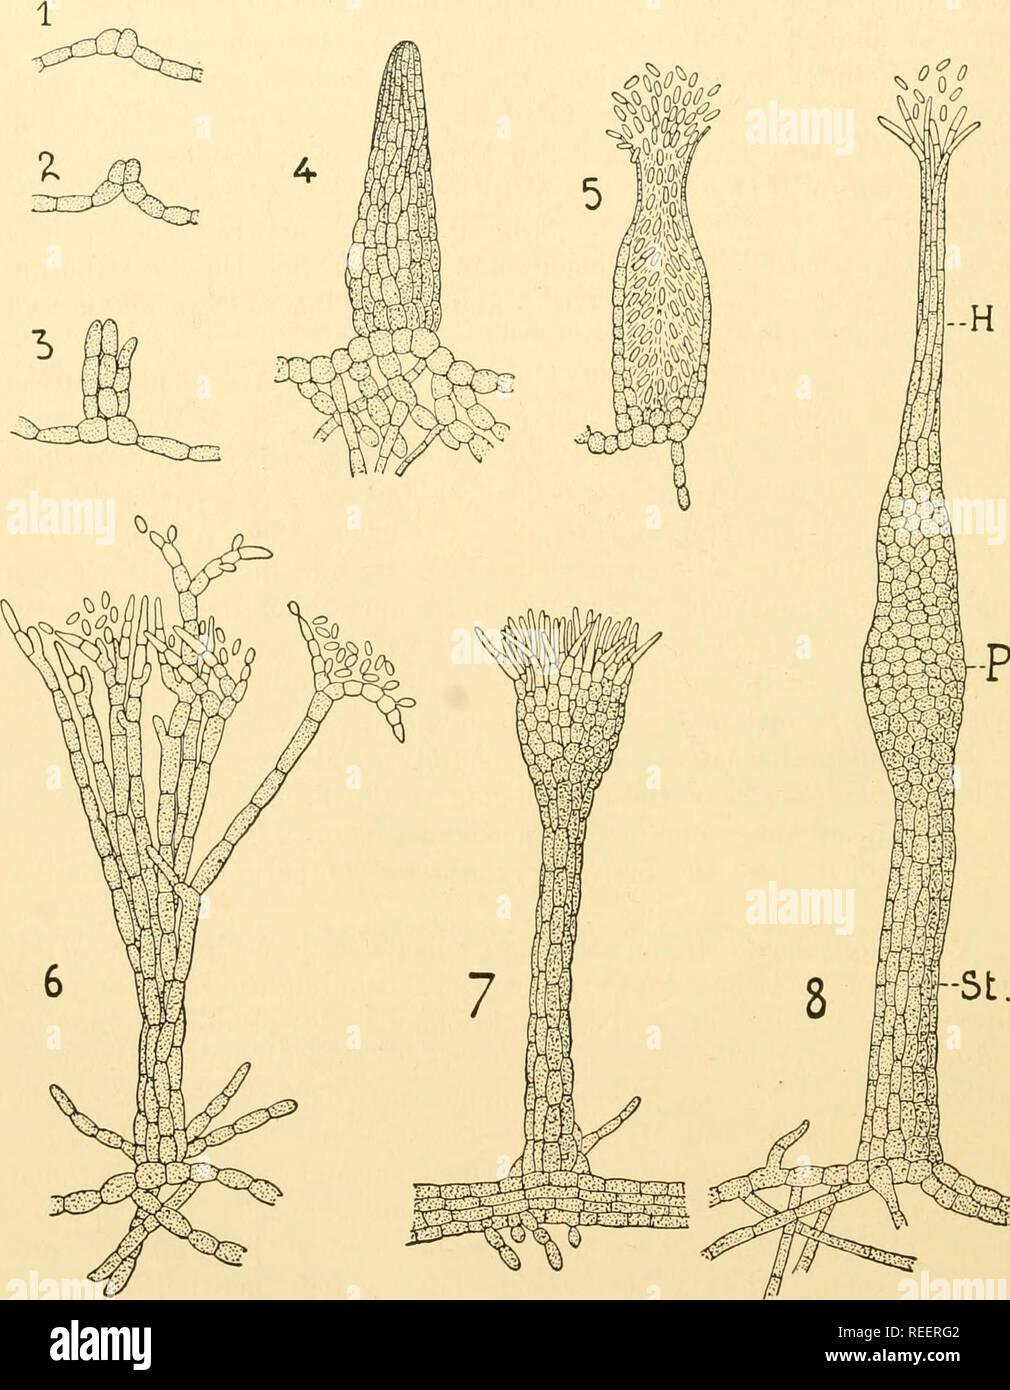 . Comparative morphology of Fungi. Fungi. 266 COMPARATIVE MORPHOLOGY OF FUNGI mould on the leaves of willow, poplar, rose, greenhouse plants, etc. All possible imperfect forms have been ascribed without their appropriateness «. Fig. 177.—Teichospora salicina. 1 to 4. Fundaments of a pycnium. 5. Section of sessile pycnium. 6. Tuft of conidiophores. 7. Coremium closing up to form a stipitate pycnium. 8. Stipitate pycnium, St, Stalk; P, pycnium; H, neck. (X 360; after Zopf, 1878.) being culturally determined. Their mycelium develops by sprouting in sugar solutions, as on honey dew in nature, occa Stock Photo